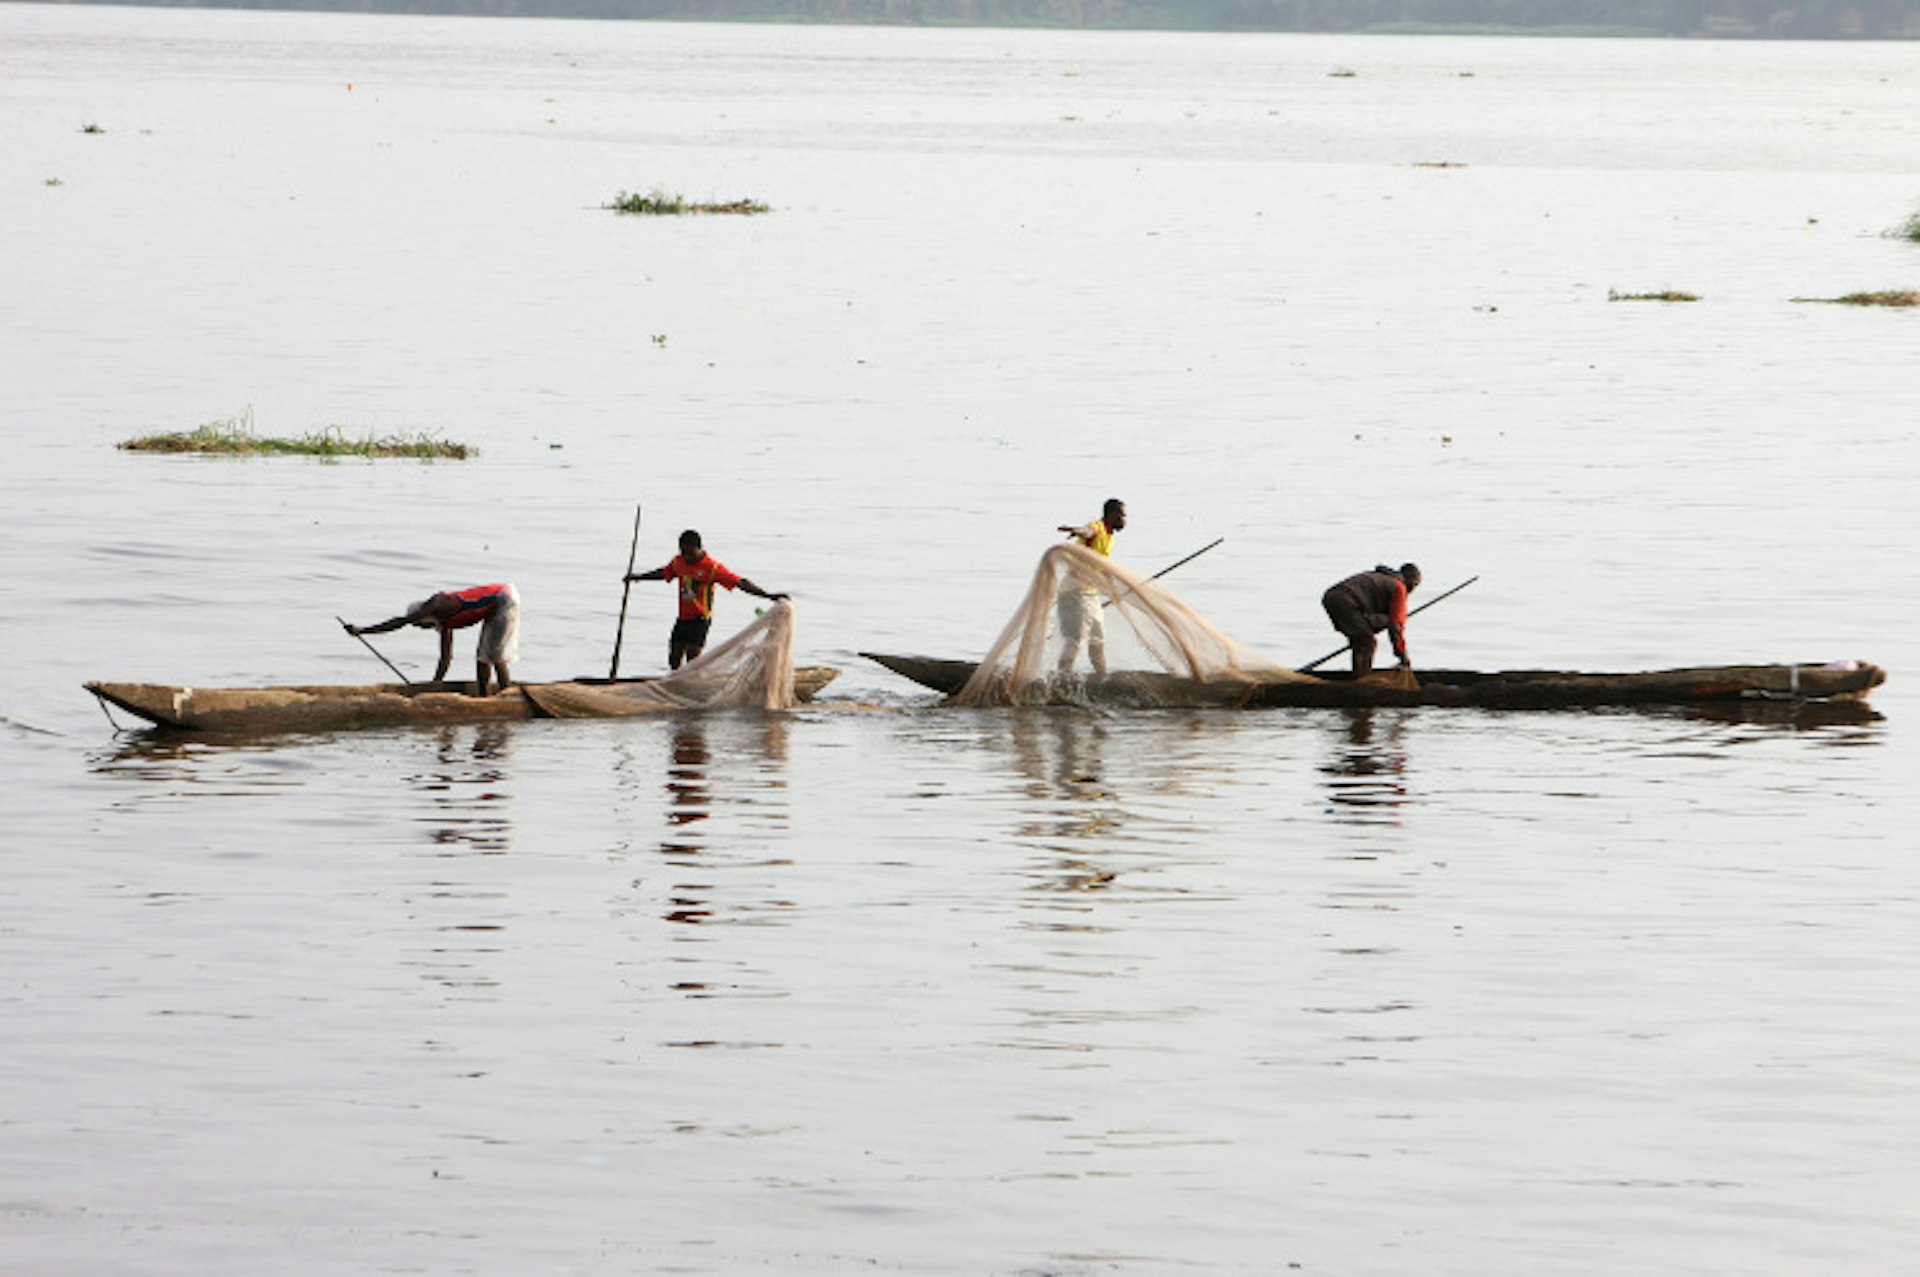 Fishermen on the Congo River, Brazzaville, Republic of Congo. Image by Pascal Deloche / Getty Images